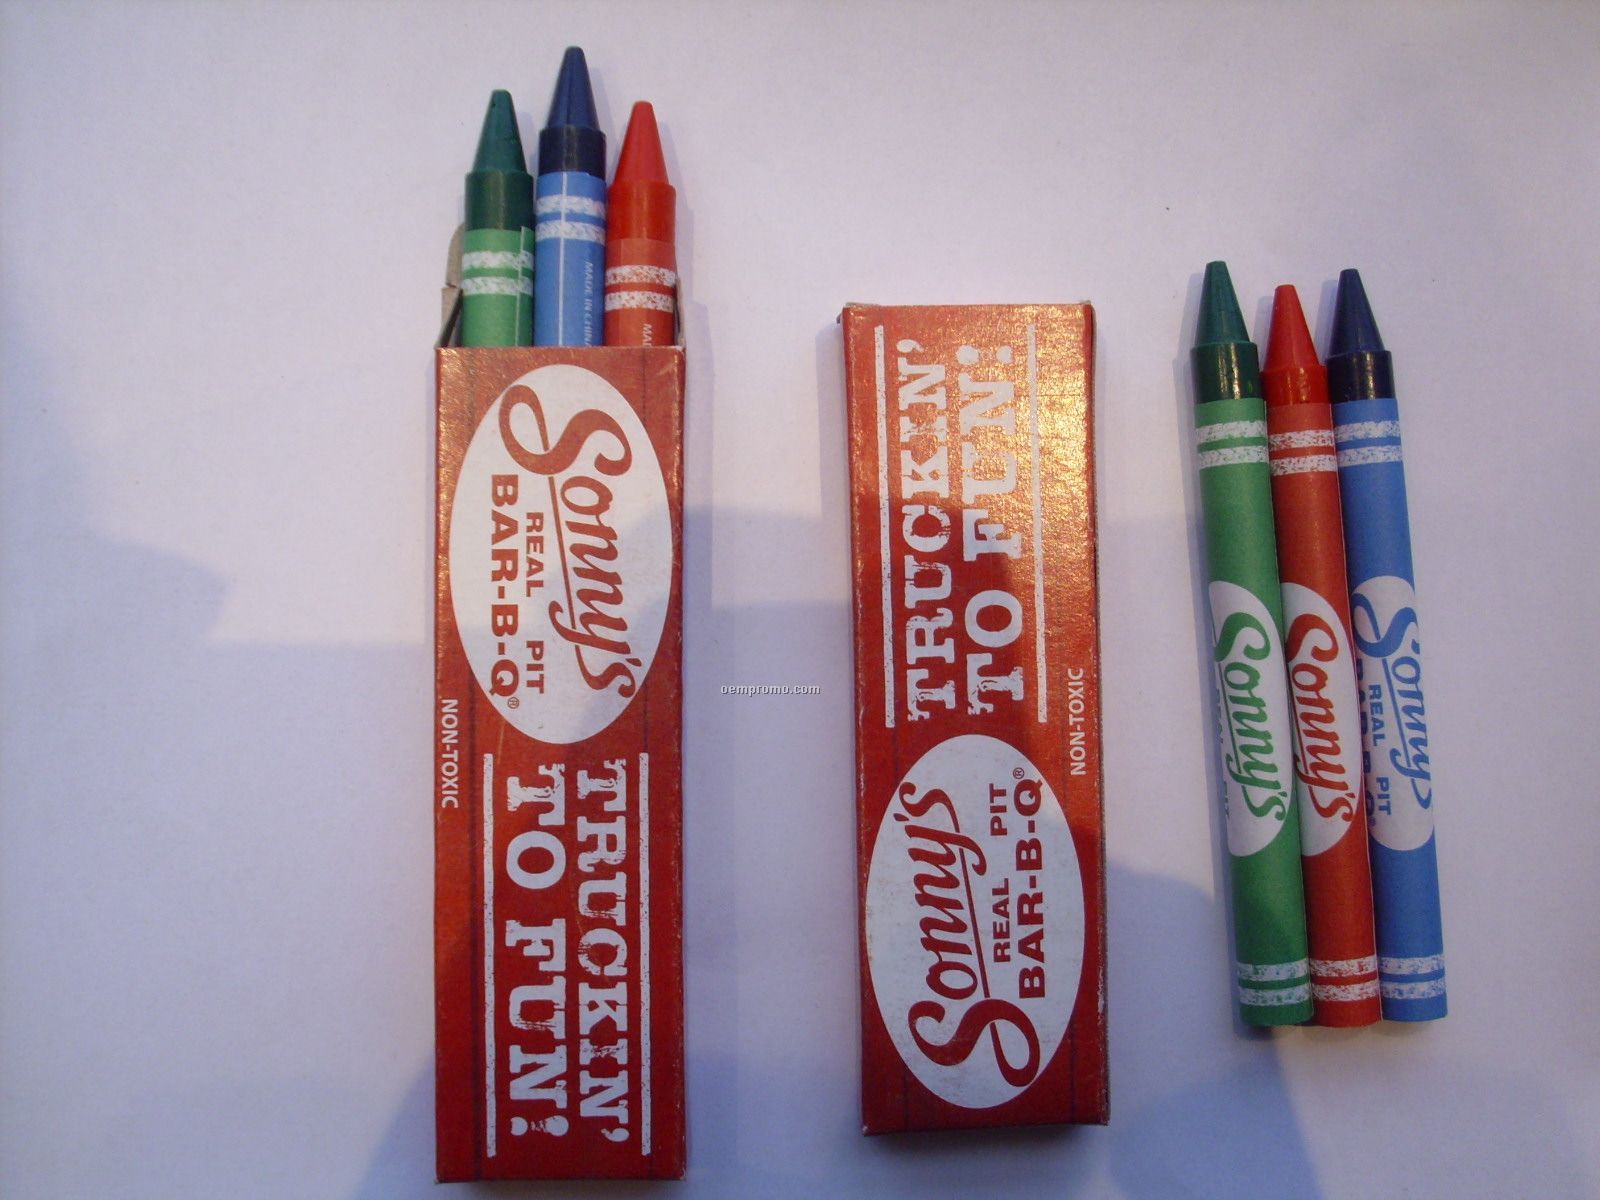 Sonny's Barbeque Crayons